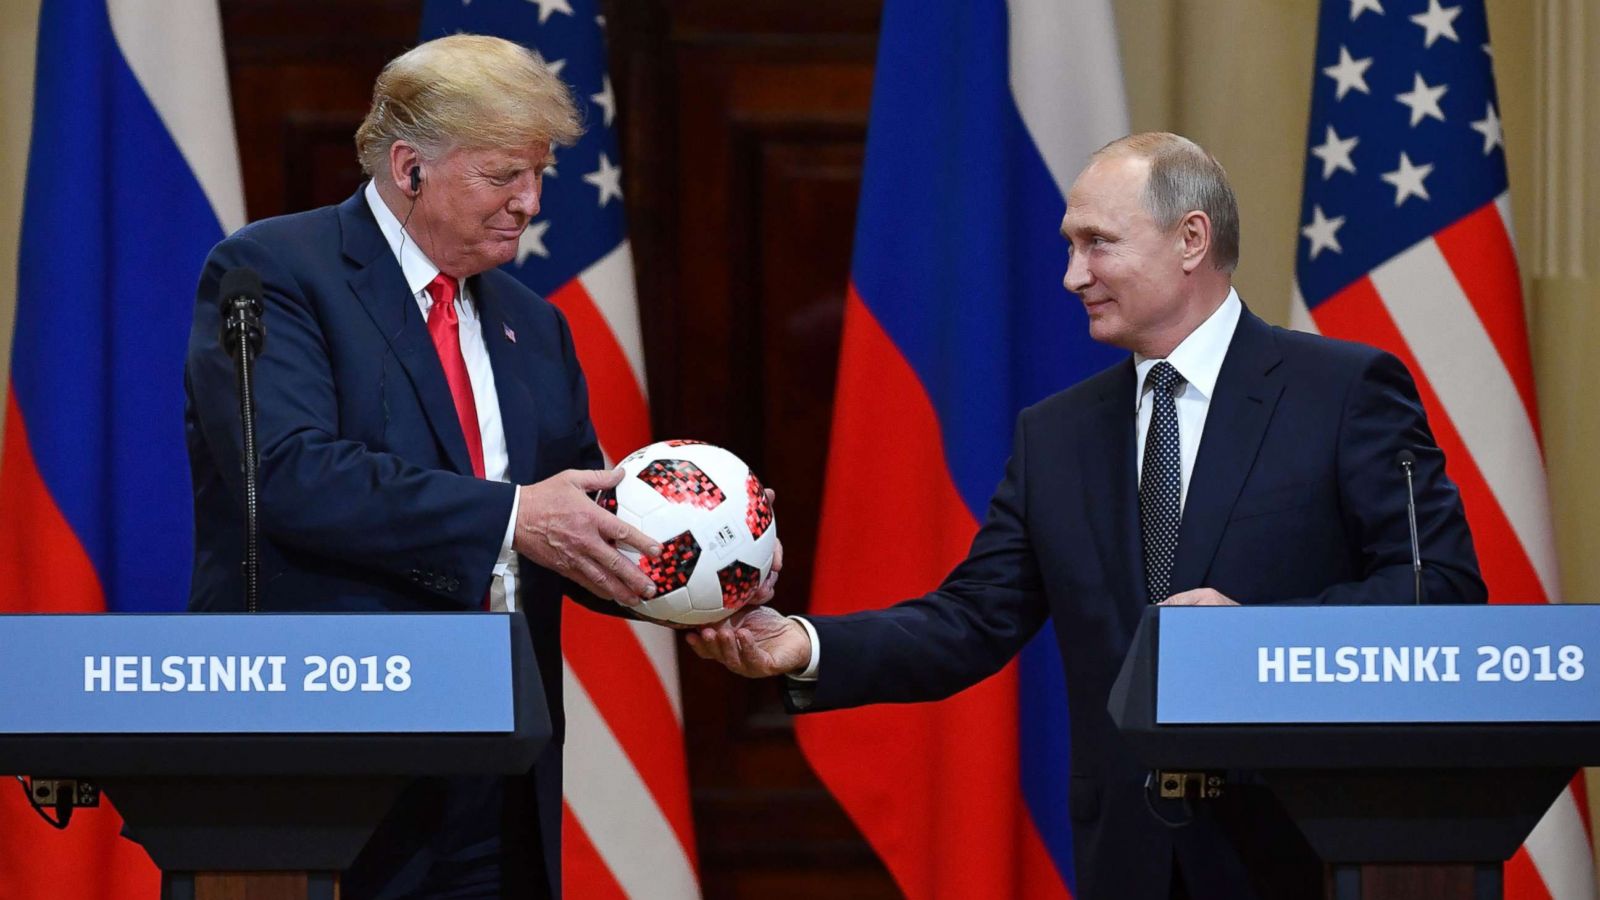 Putin gives Trump World Cup ball after question on Syria: &amp;#39;Now the ball is  in your court&amp;#39; - ABC News